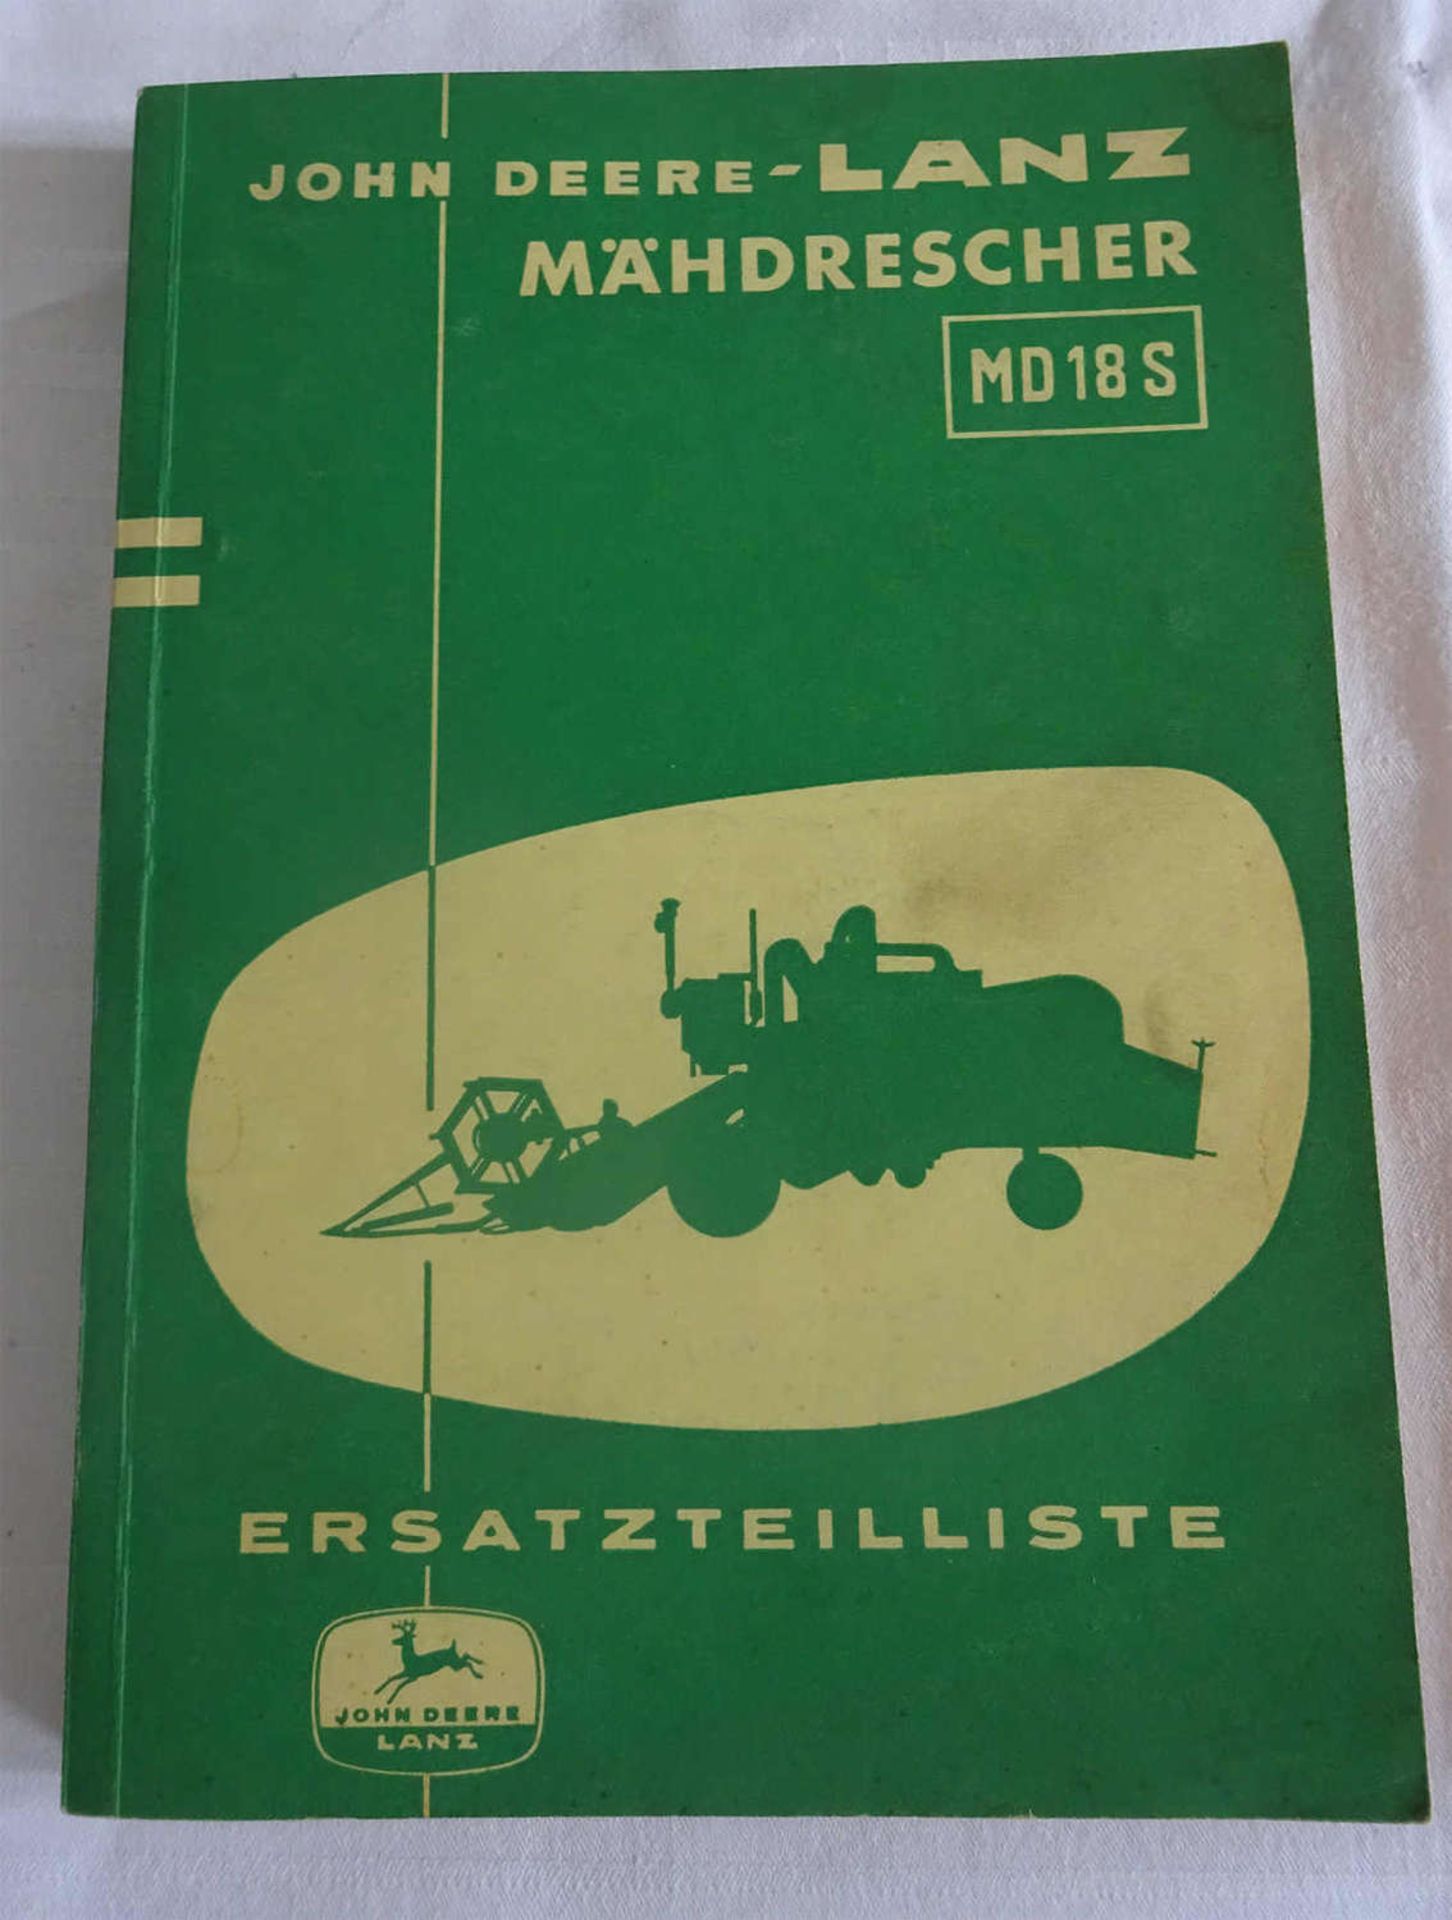 John Deere - Lanz combine harvester MD 18S, spare parts list, February 1961